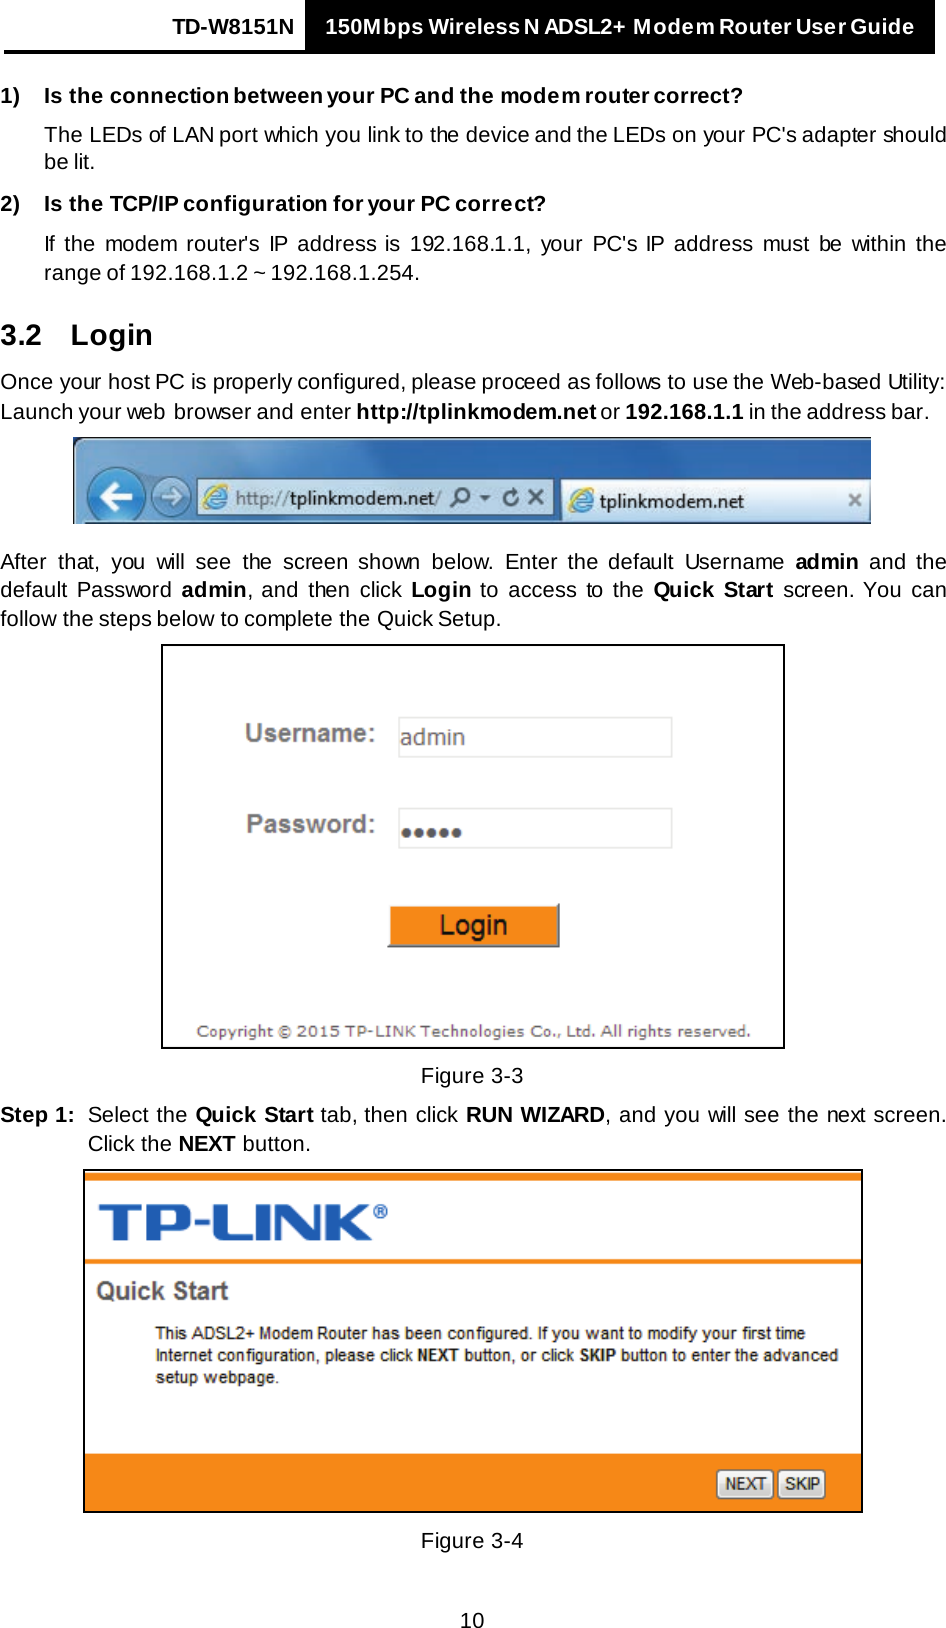 TD-W8151N 150Mbps Wireless N ADSL2+ Modem Router User Guide   10 1) Is the connection between your PC and the modem router correct? The LEDs of LAN port which you link to the device and the LEDs on your PC&apos;s adapter should be lit. 2) Is the TCP/IP configuration for your PC correct? If the modem router&apos;s IP address is 192.168.1.1, your PC&apos;s IP address must be within the range of 192.168.1.2 ~ 192.168.1.254. 3.2 Login Once your host PC is properly configured, please proceed as follows to use the Web-based Utility: Launch your web  browser and enter http://tplinkmodem.net or 192.168.1.1 in the address bar.  After that, you will see the screen shown below.  Enter  the default  Username  admin and  the default Password admin, and  then  click Login to access to  the  Quick Start screen. You can follow  the steps below  to complete the Quick Setup.  Figure 3-3 Step 1: Select the Quick Start tab, then click RUN WIZARD, and you will see the next screen. Click the NEXT button.  Figure 3-4 